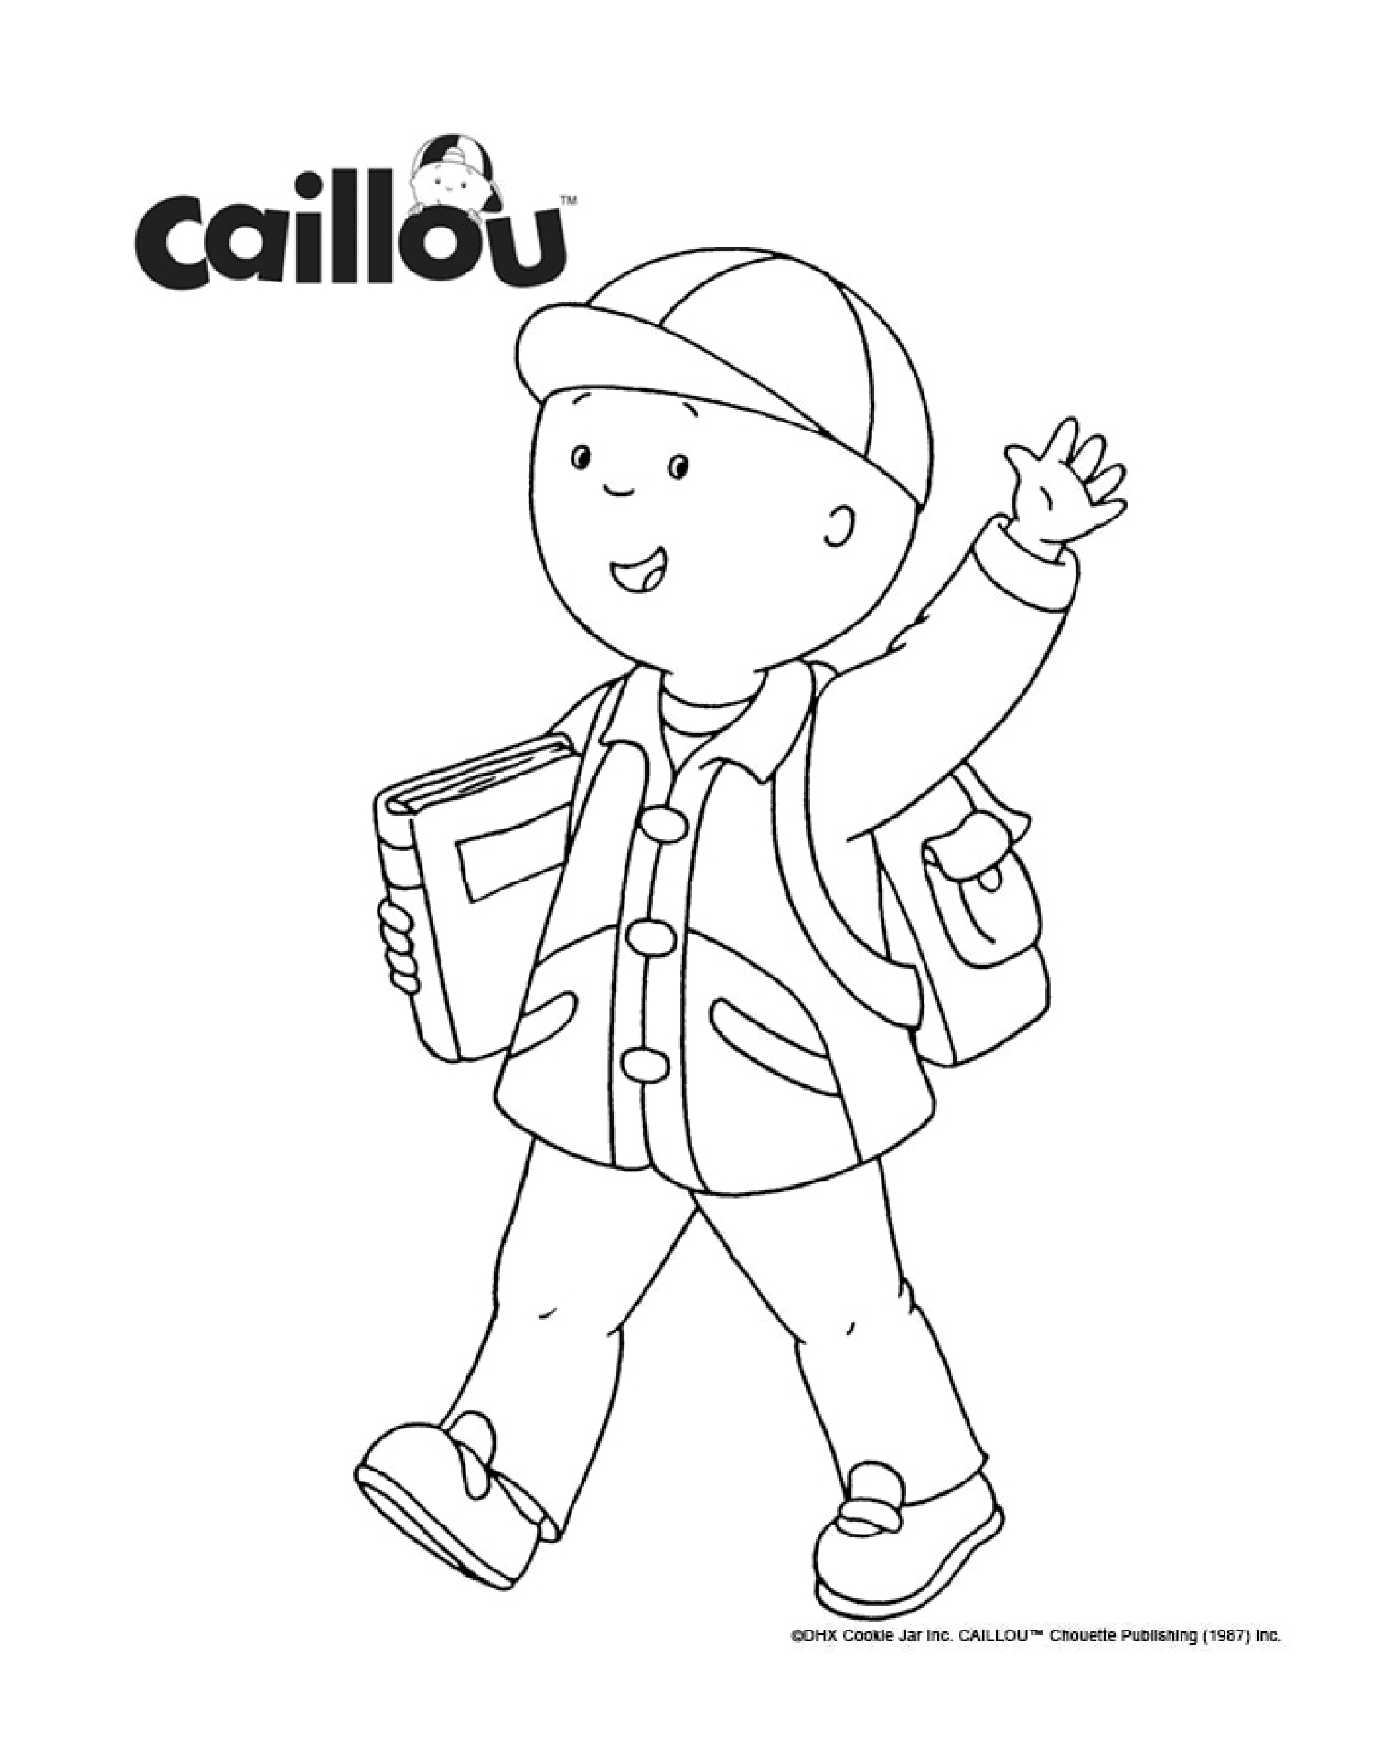  Back to school: Caillou likes to go to school 